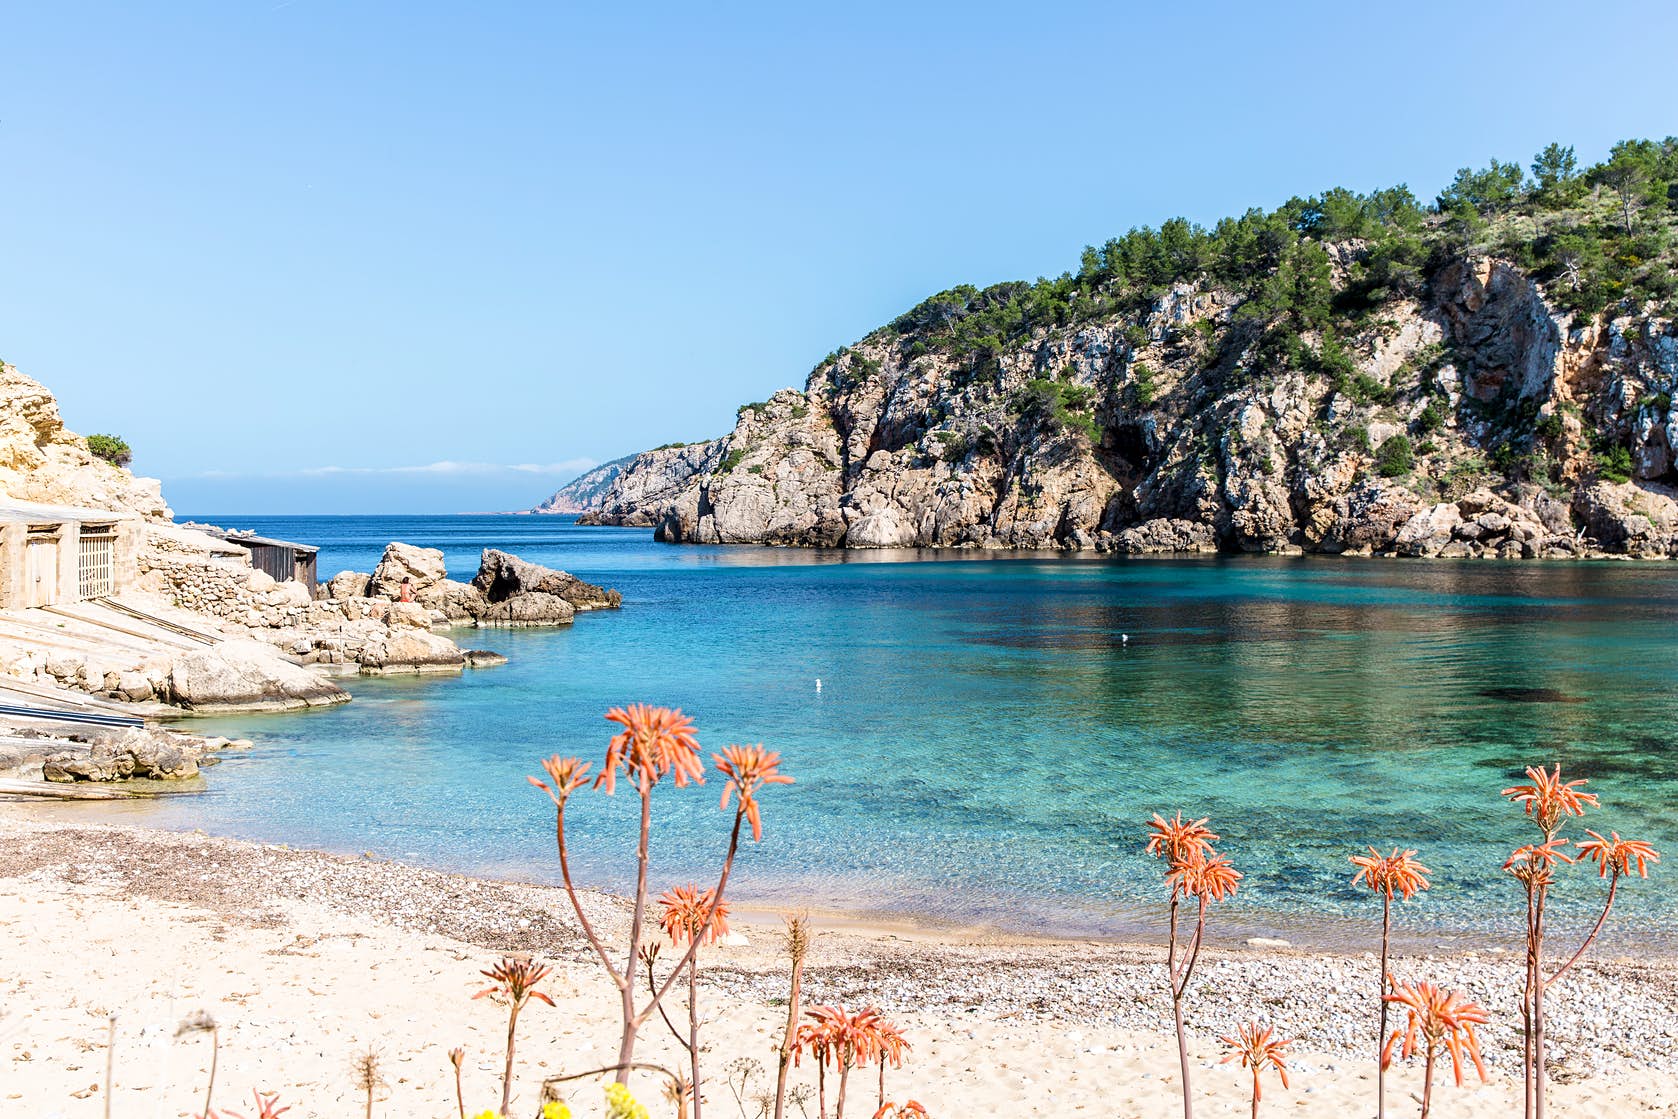 IBIZA embraces its softer side this summer without superclubs and dance parties